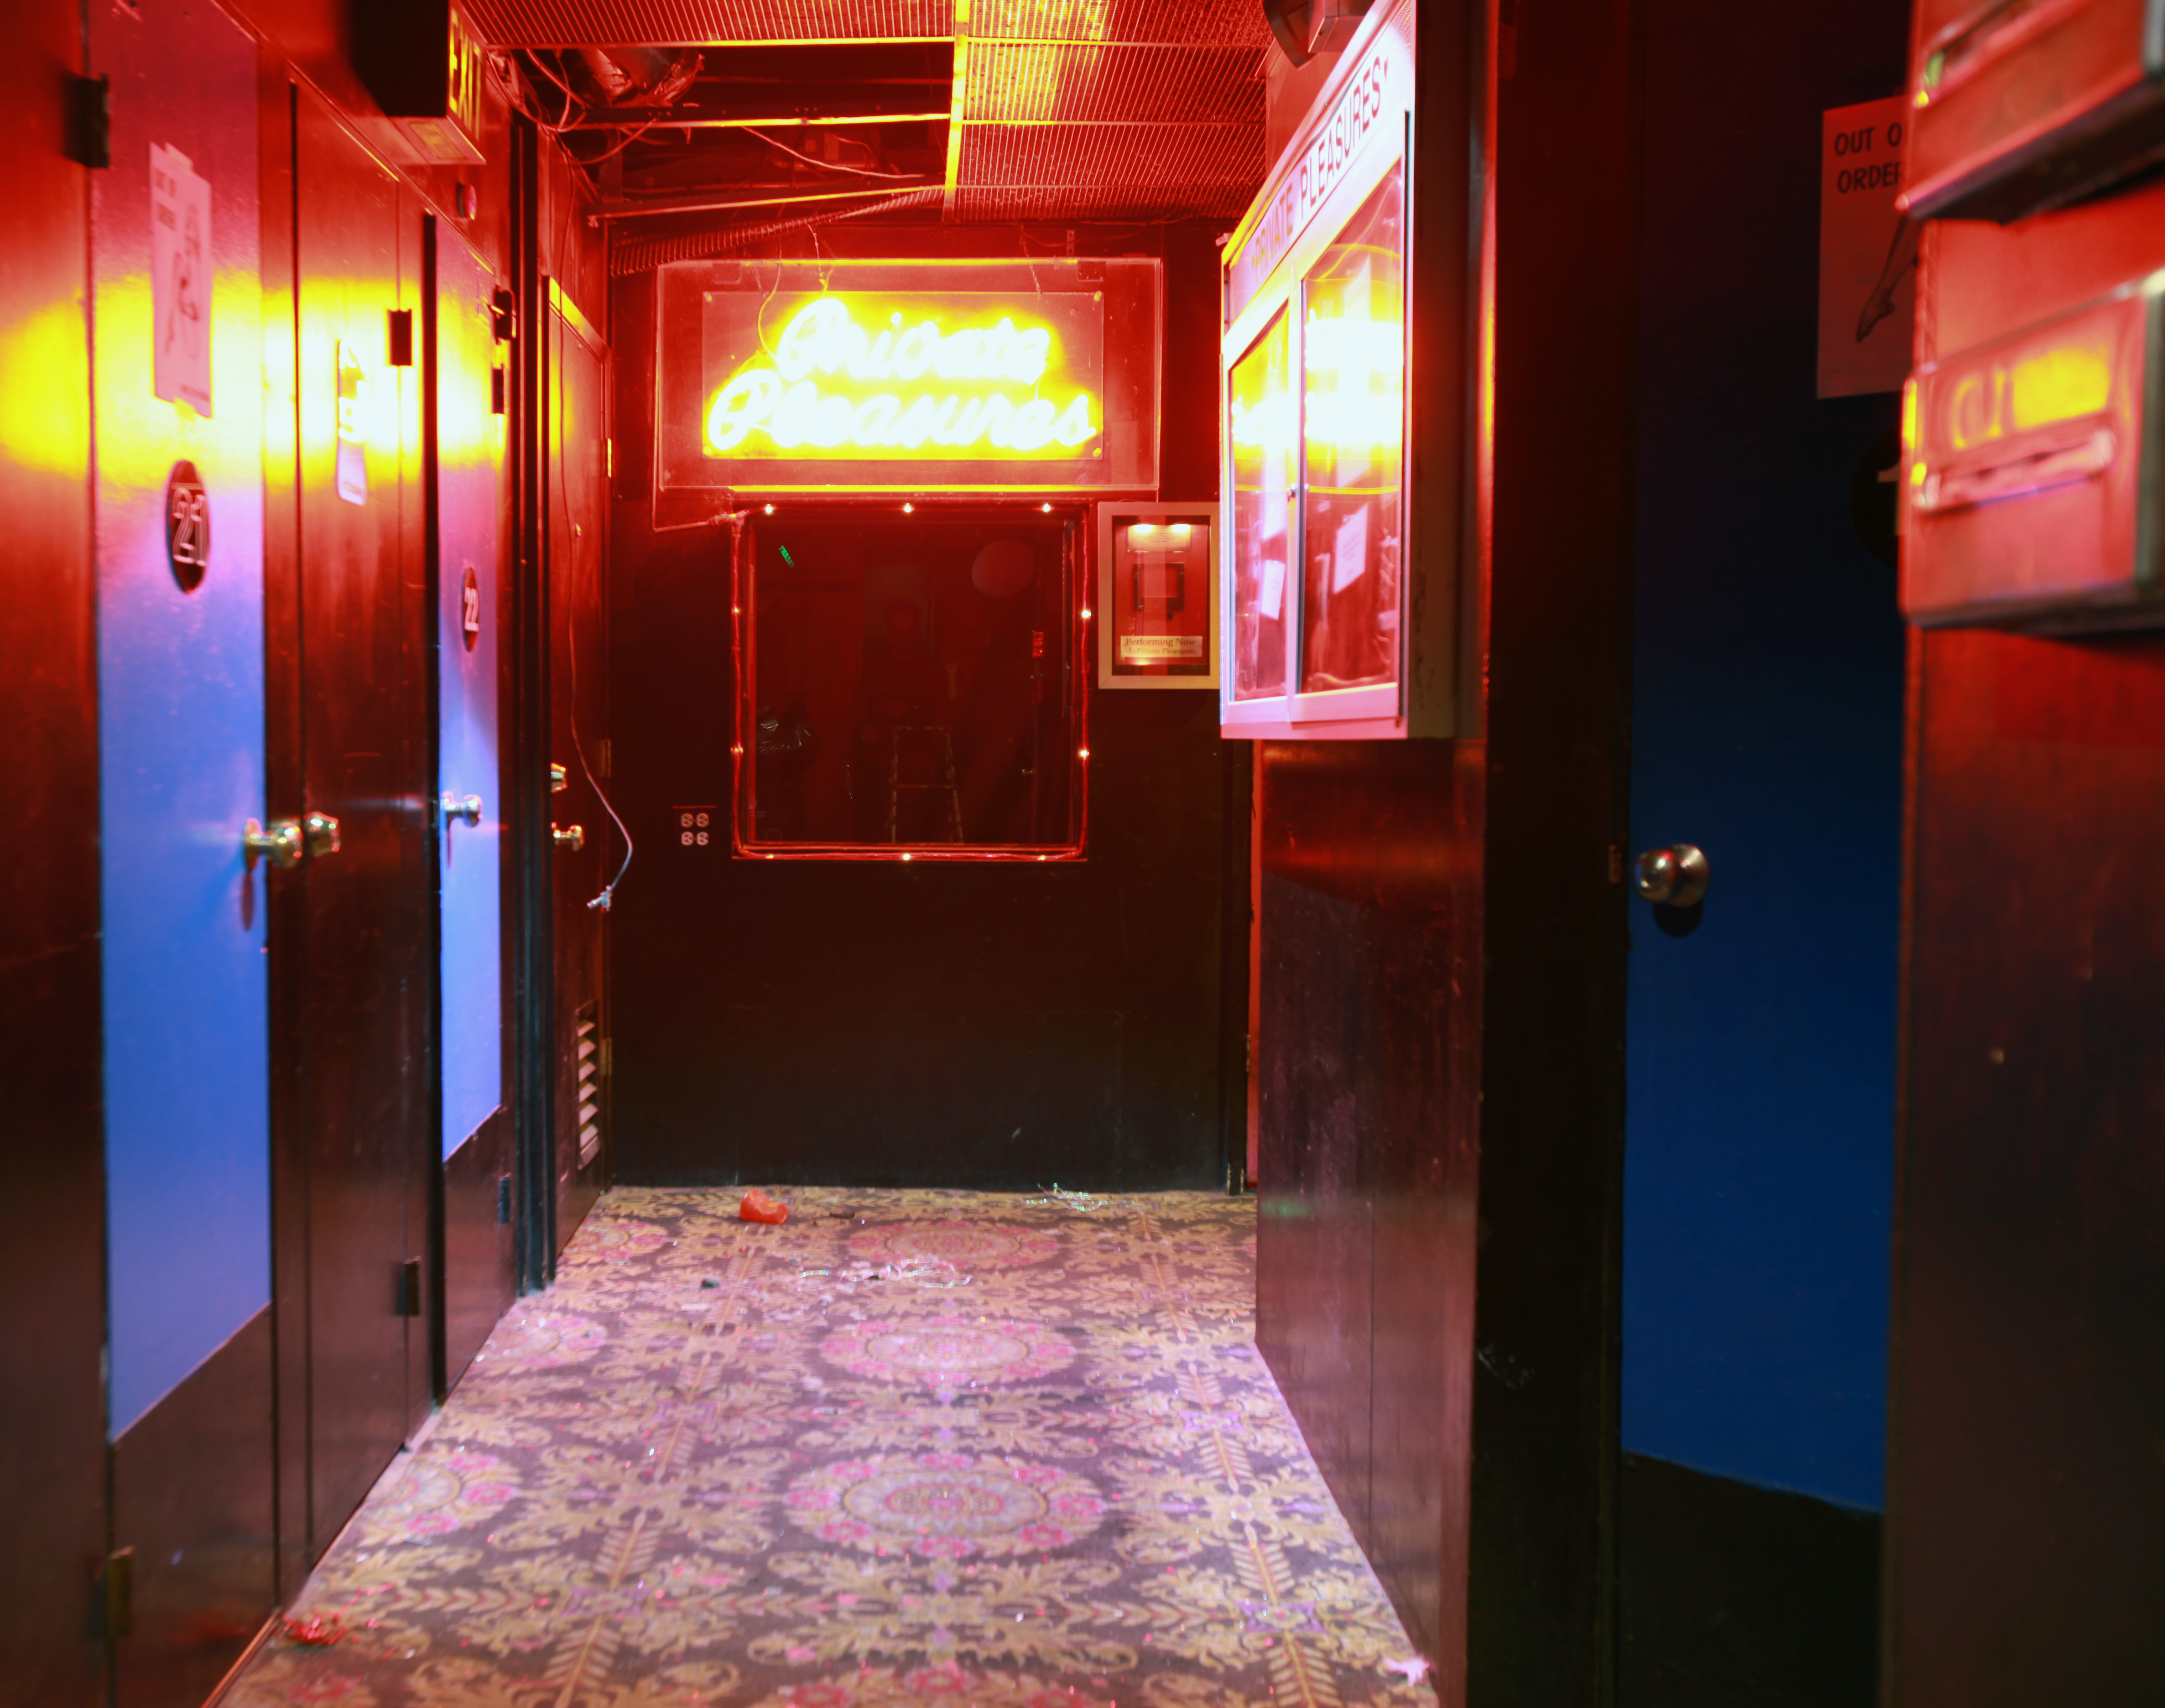 Buddy Booths San Francisco,Gay Adult Theater Booths,Adult Bookstore Buddy B...